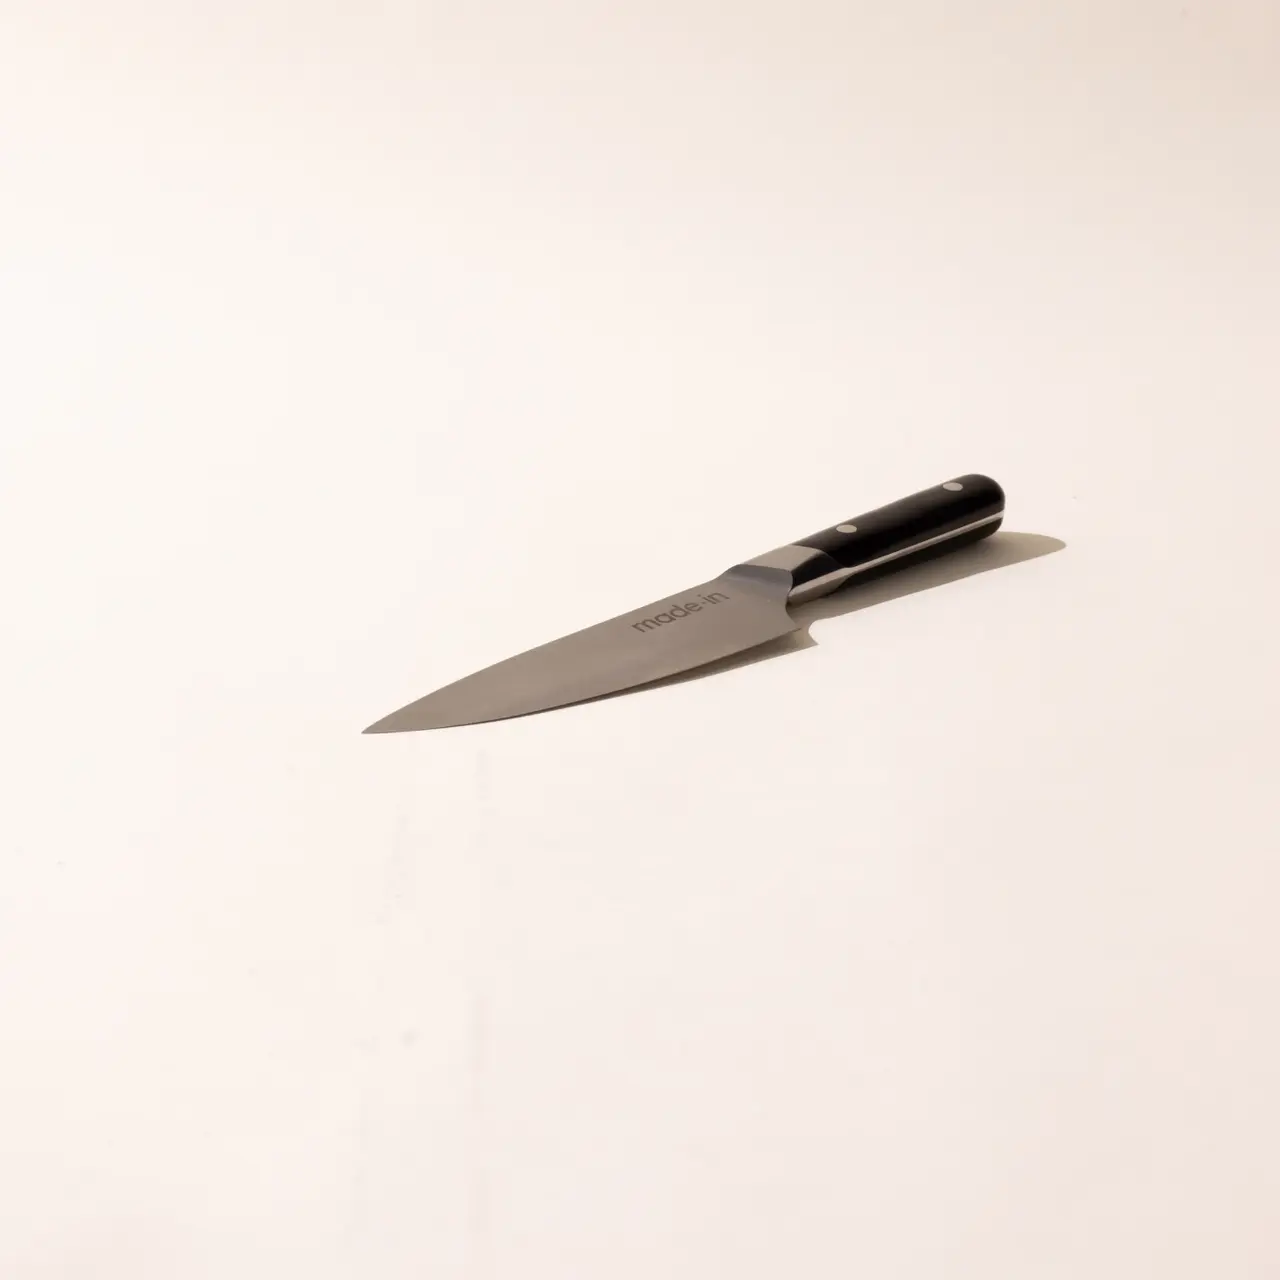 A solitary kitchen knife with a black handle is lying flat on a plain light background.